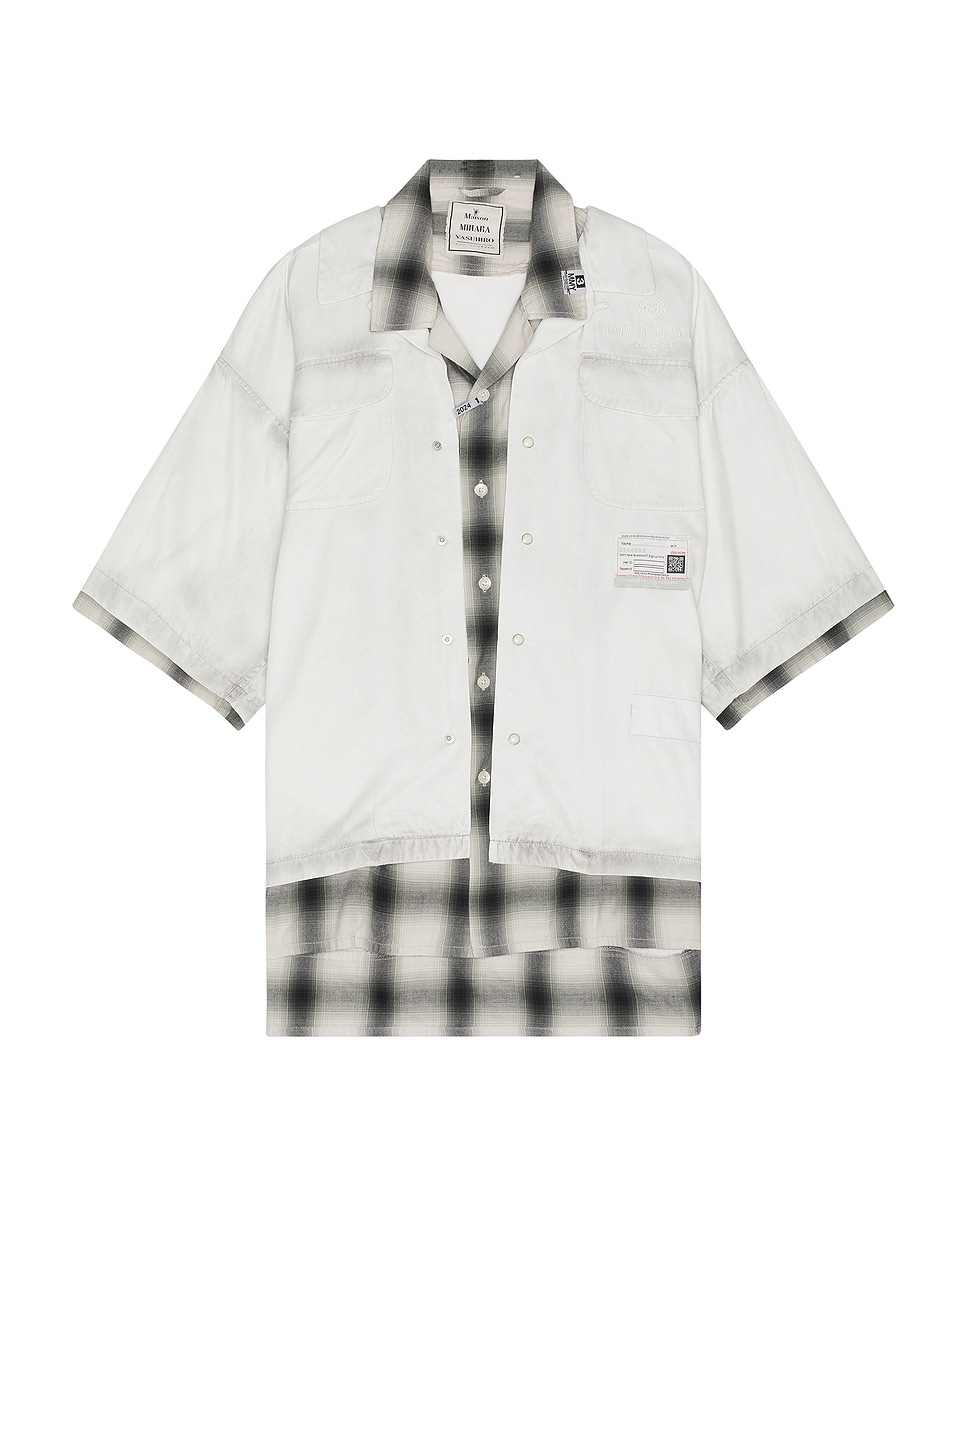 Rc Twill Double Layered Shirt in White